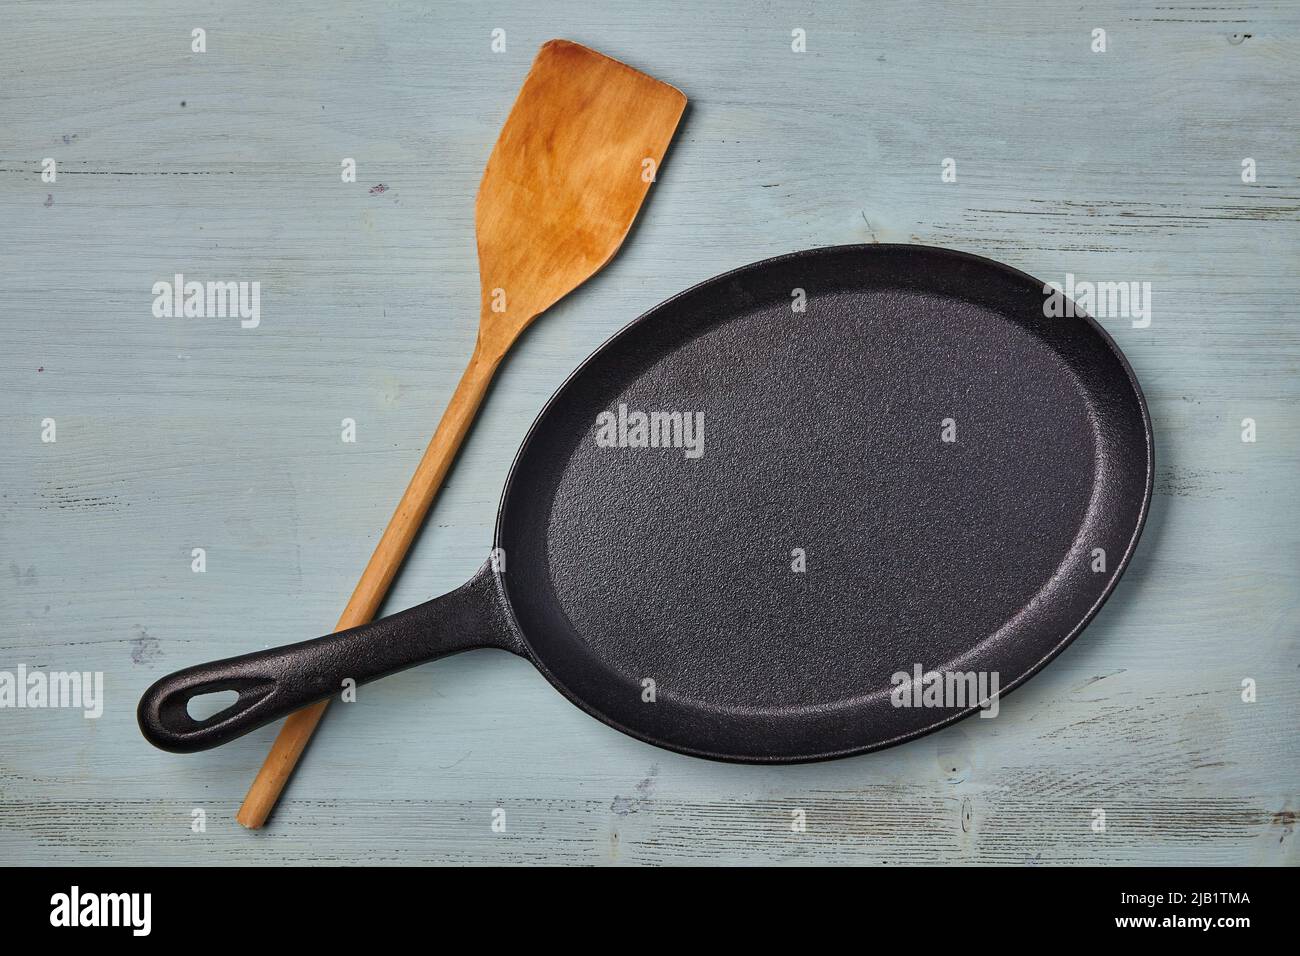 https://c8.alamy.com/comp/2JB1TMA/oval-cast-iron-frying-pan-with-a-wooden-spatula-on-a-blue-wooden-table-template-for-laying-out-dishes-2JB1TMA.jpg